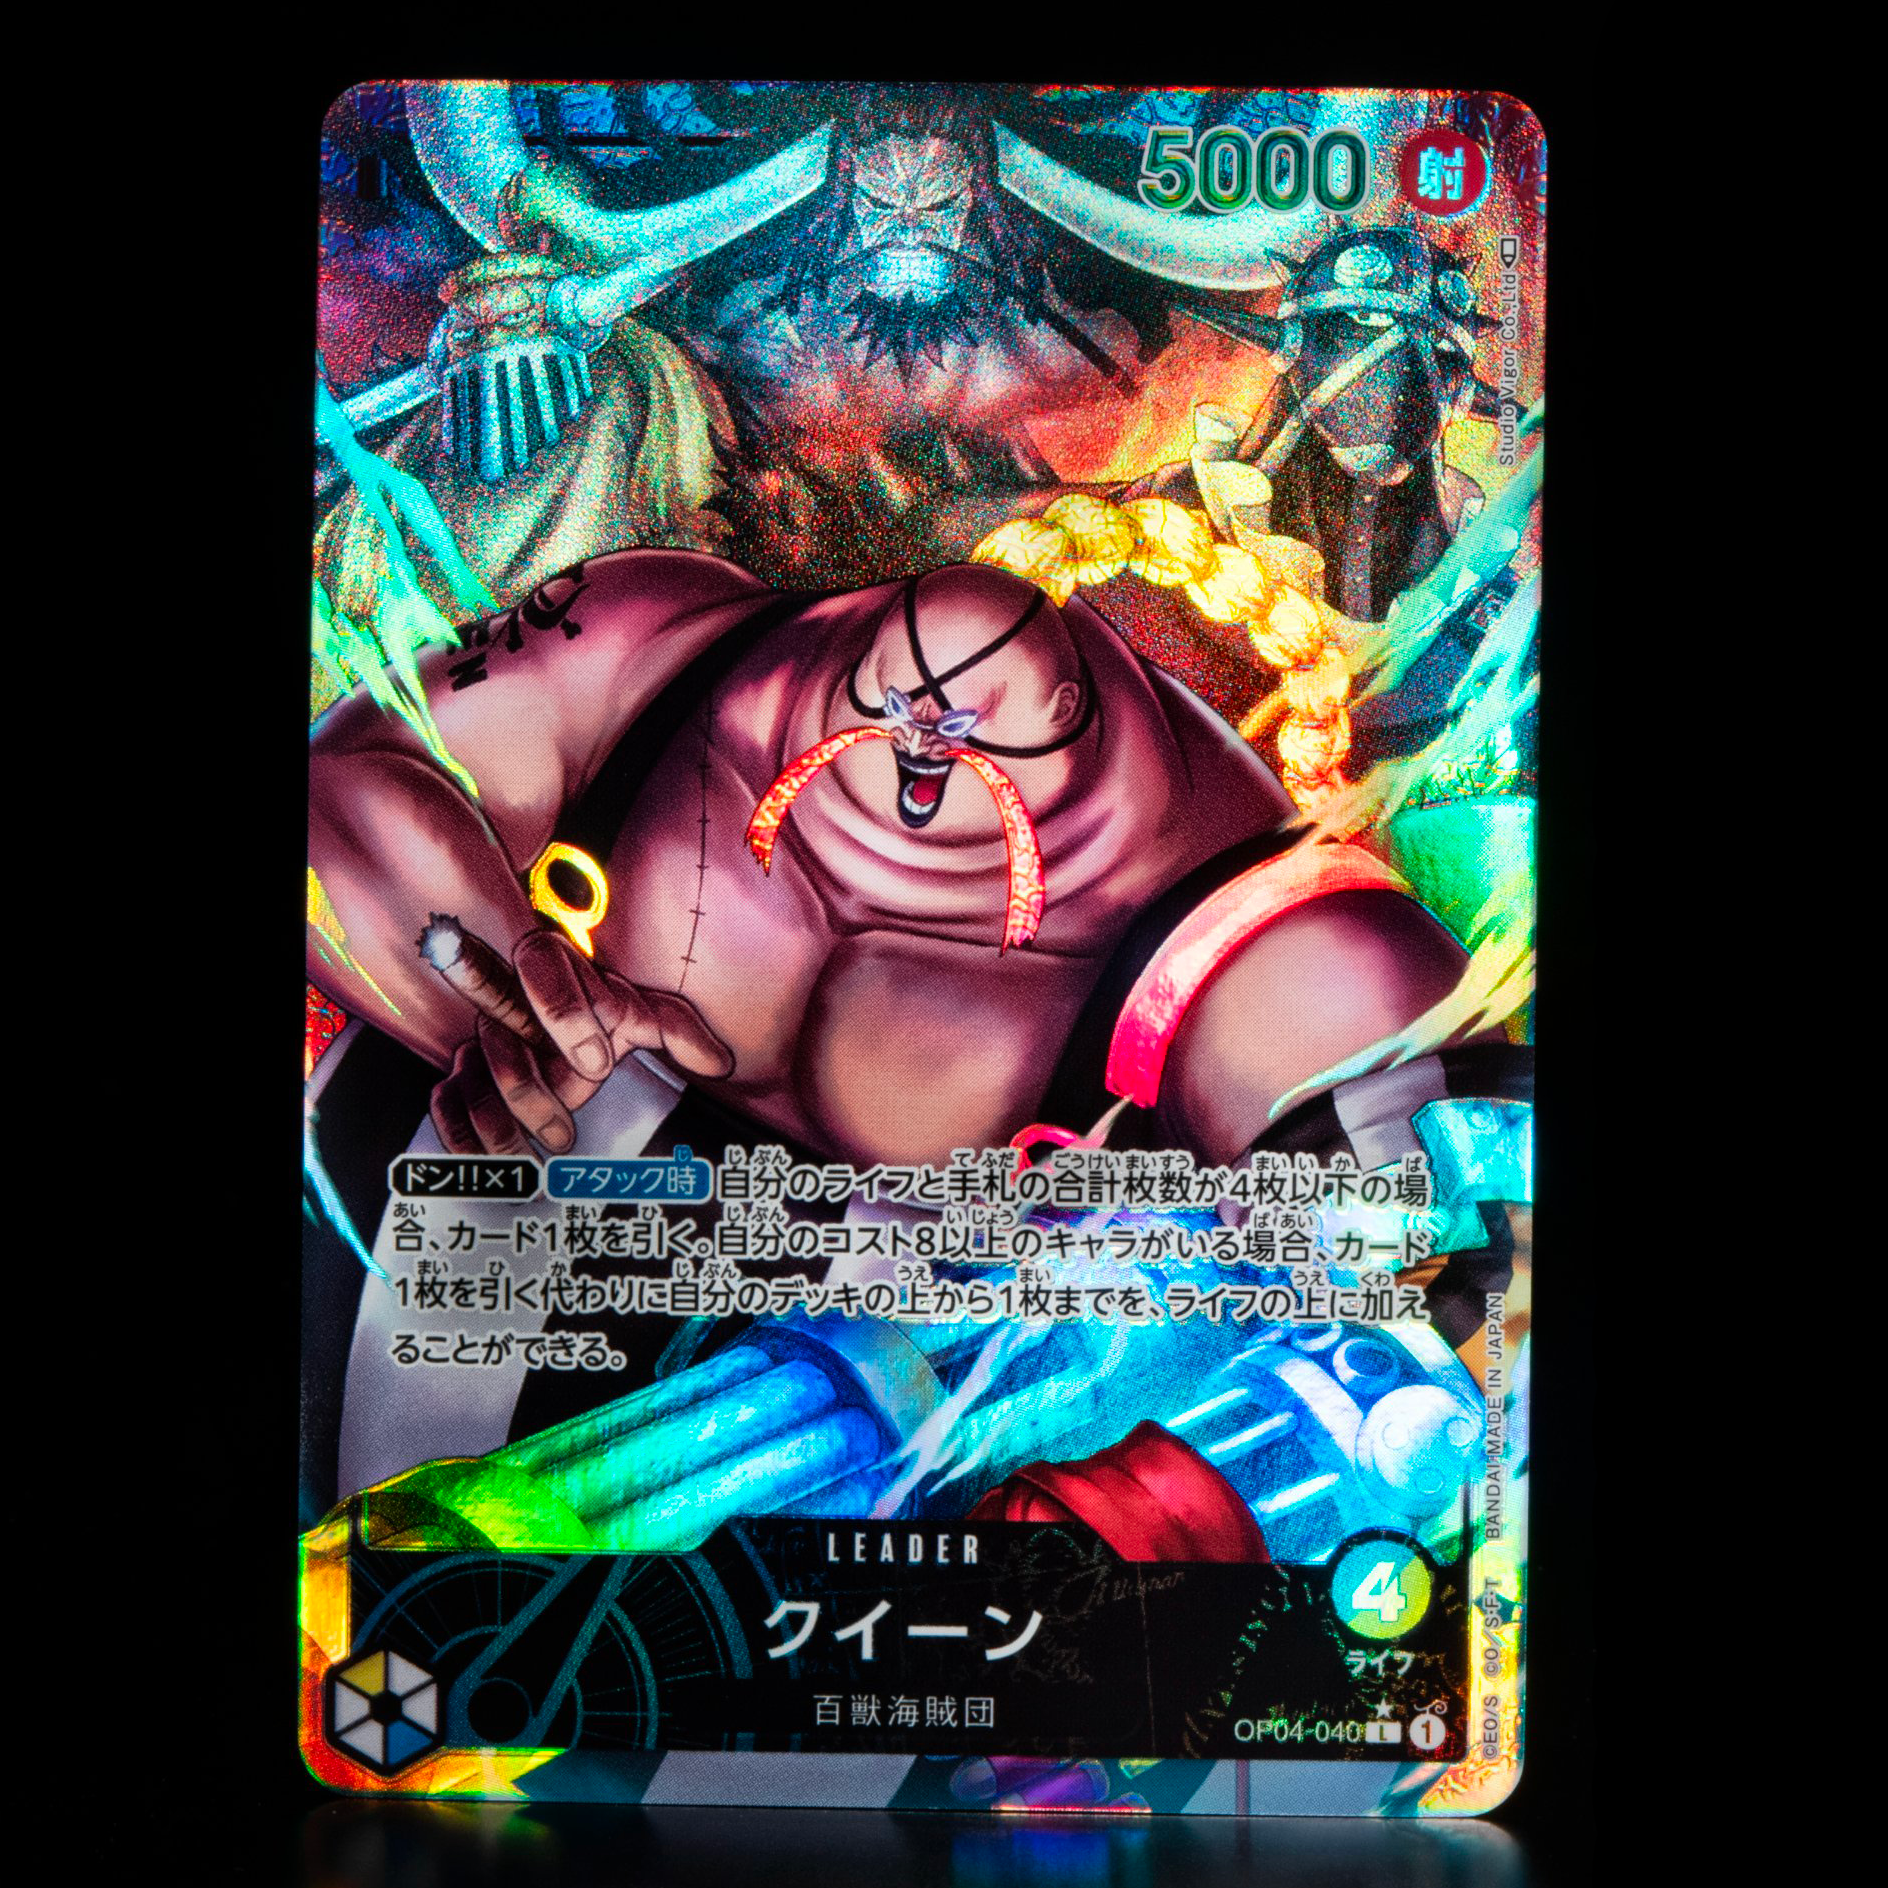 ONE PIECE CARD GAME ｢Kingdoms of Intrigue｣  ONE PIECE CARD GAME OP04-040 Leader Parallel card  Queen